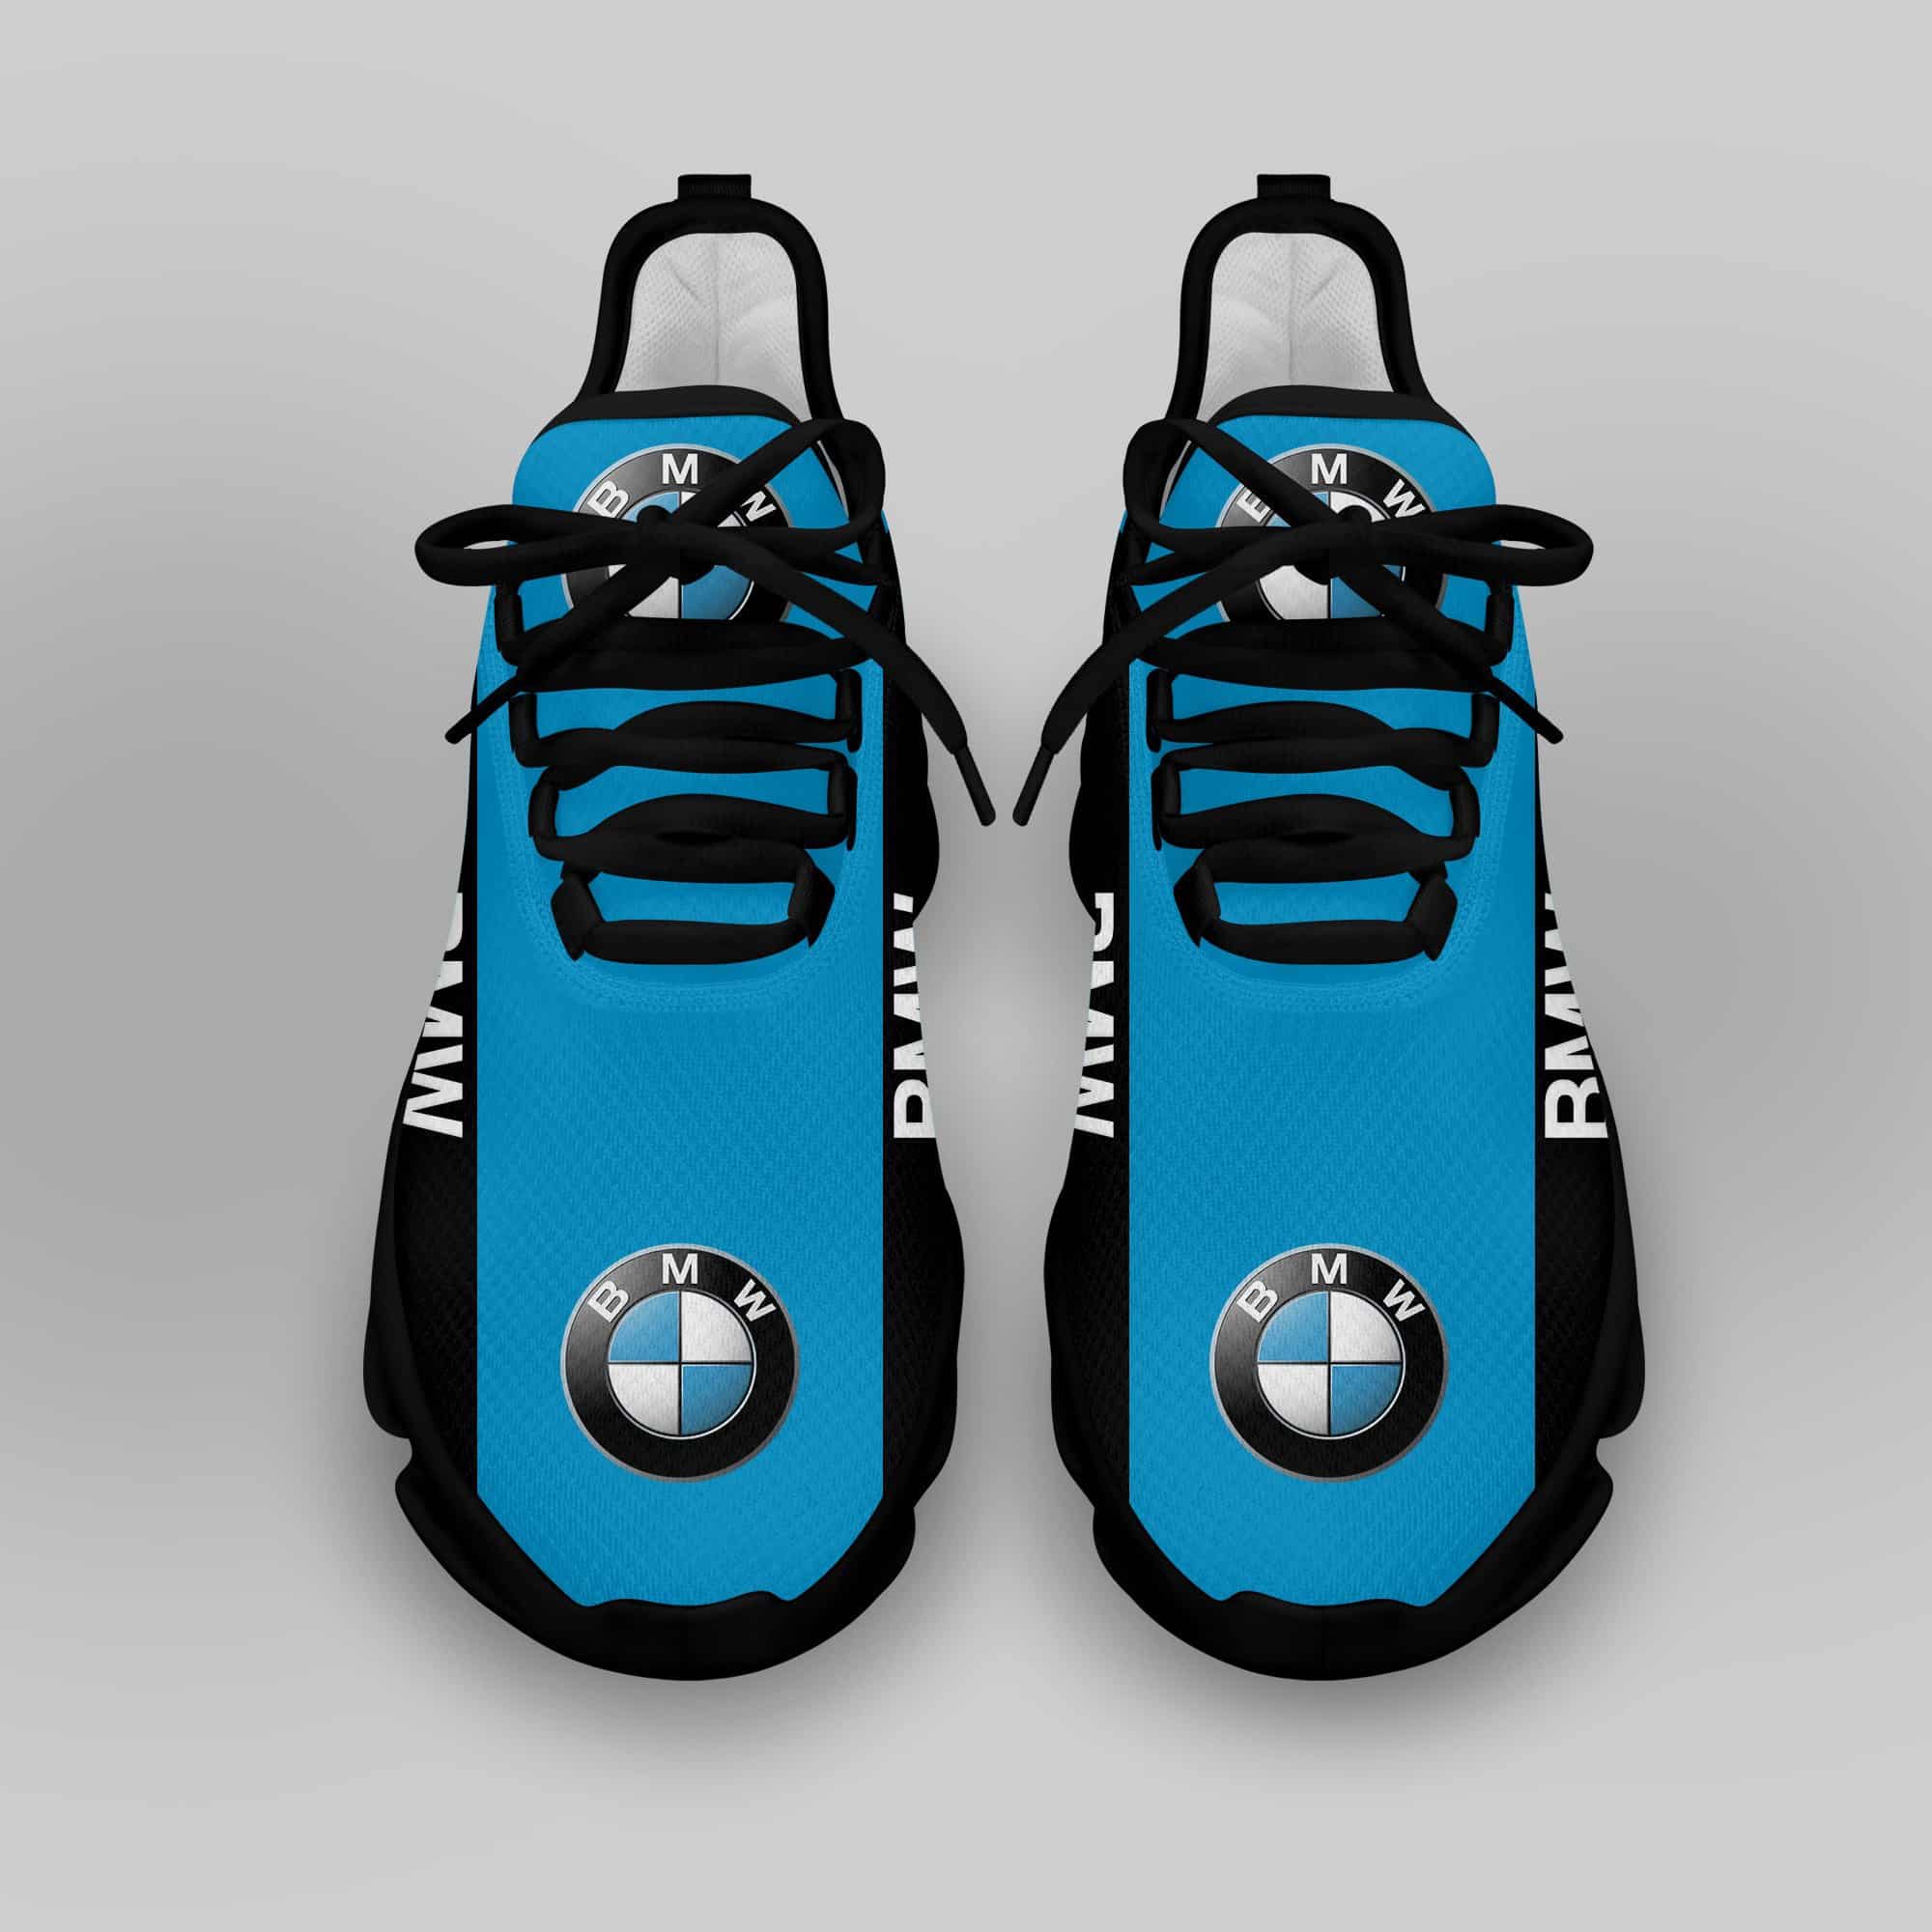 Bmw Running Shoes Max Soul Shoes Sneakers Ver 20 4